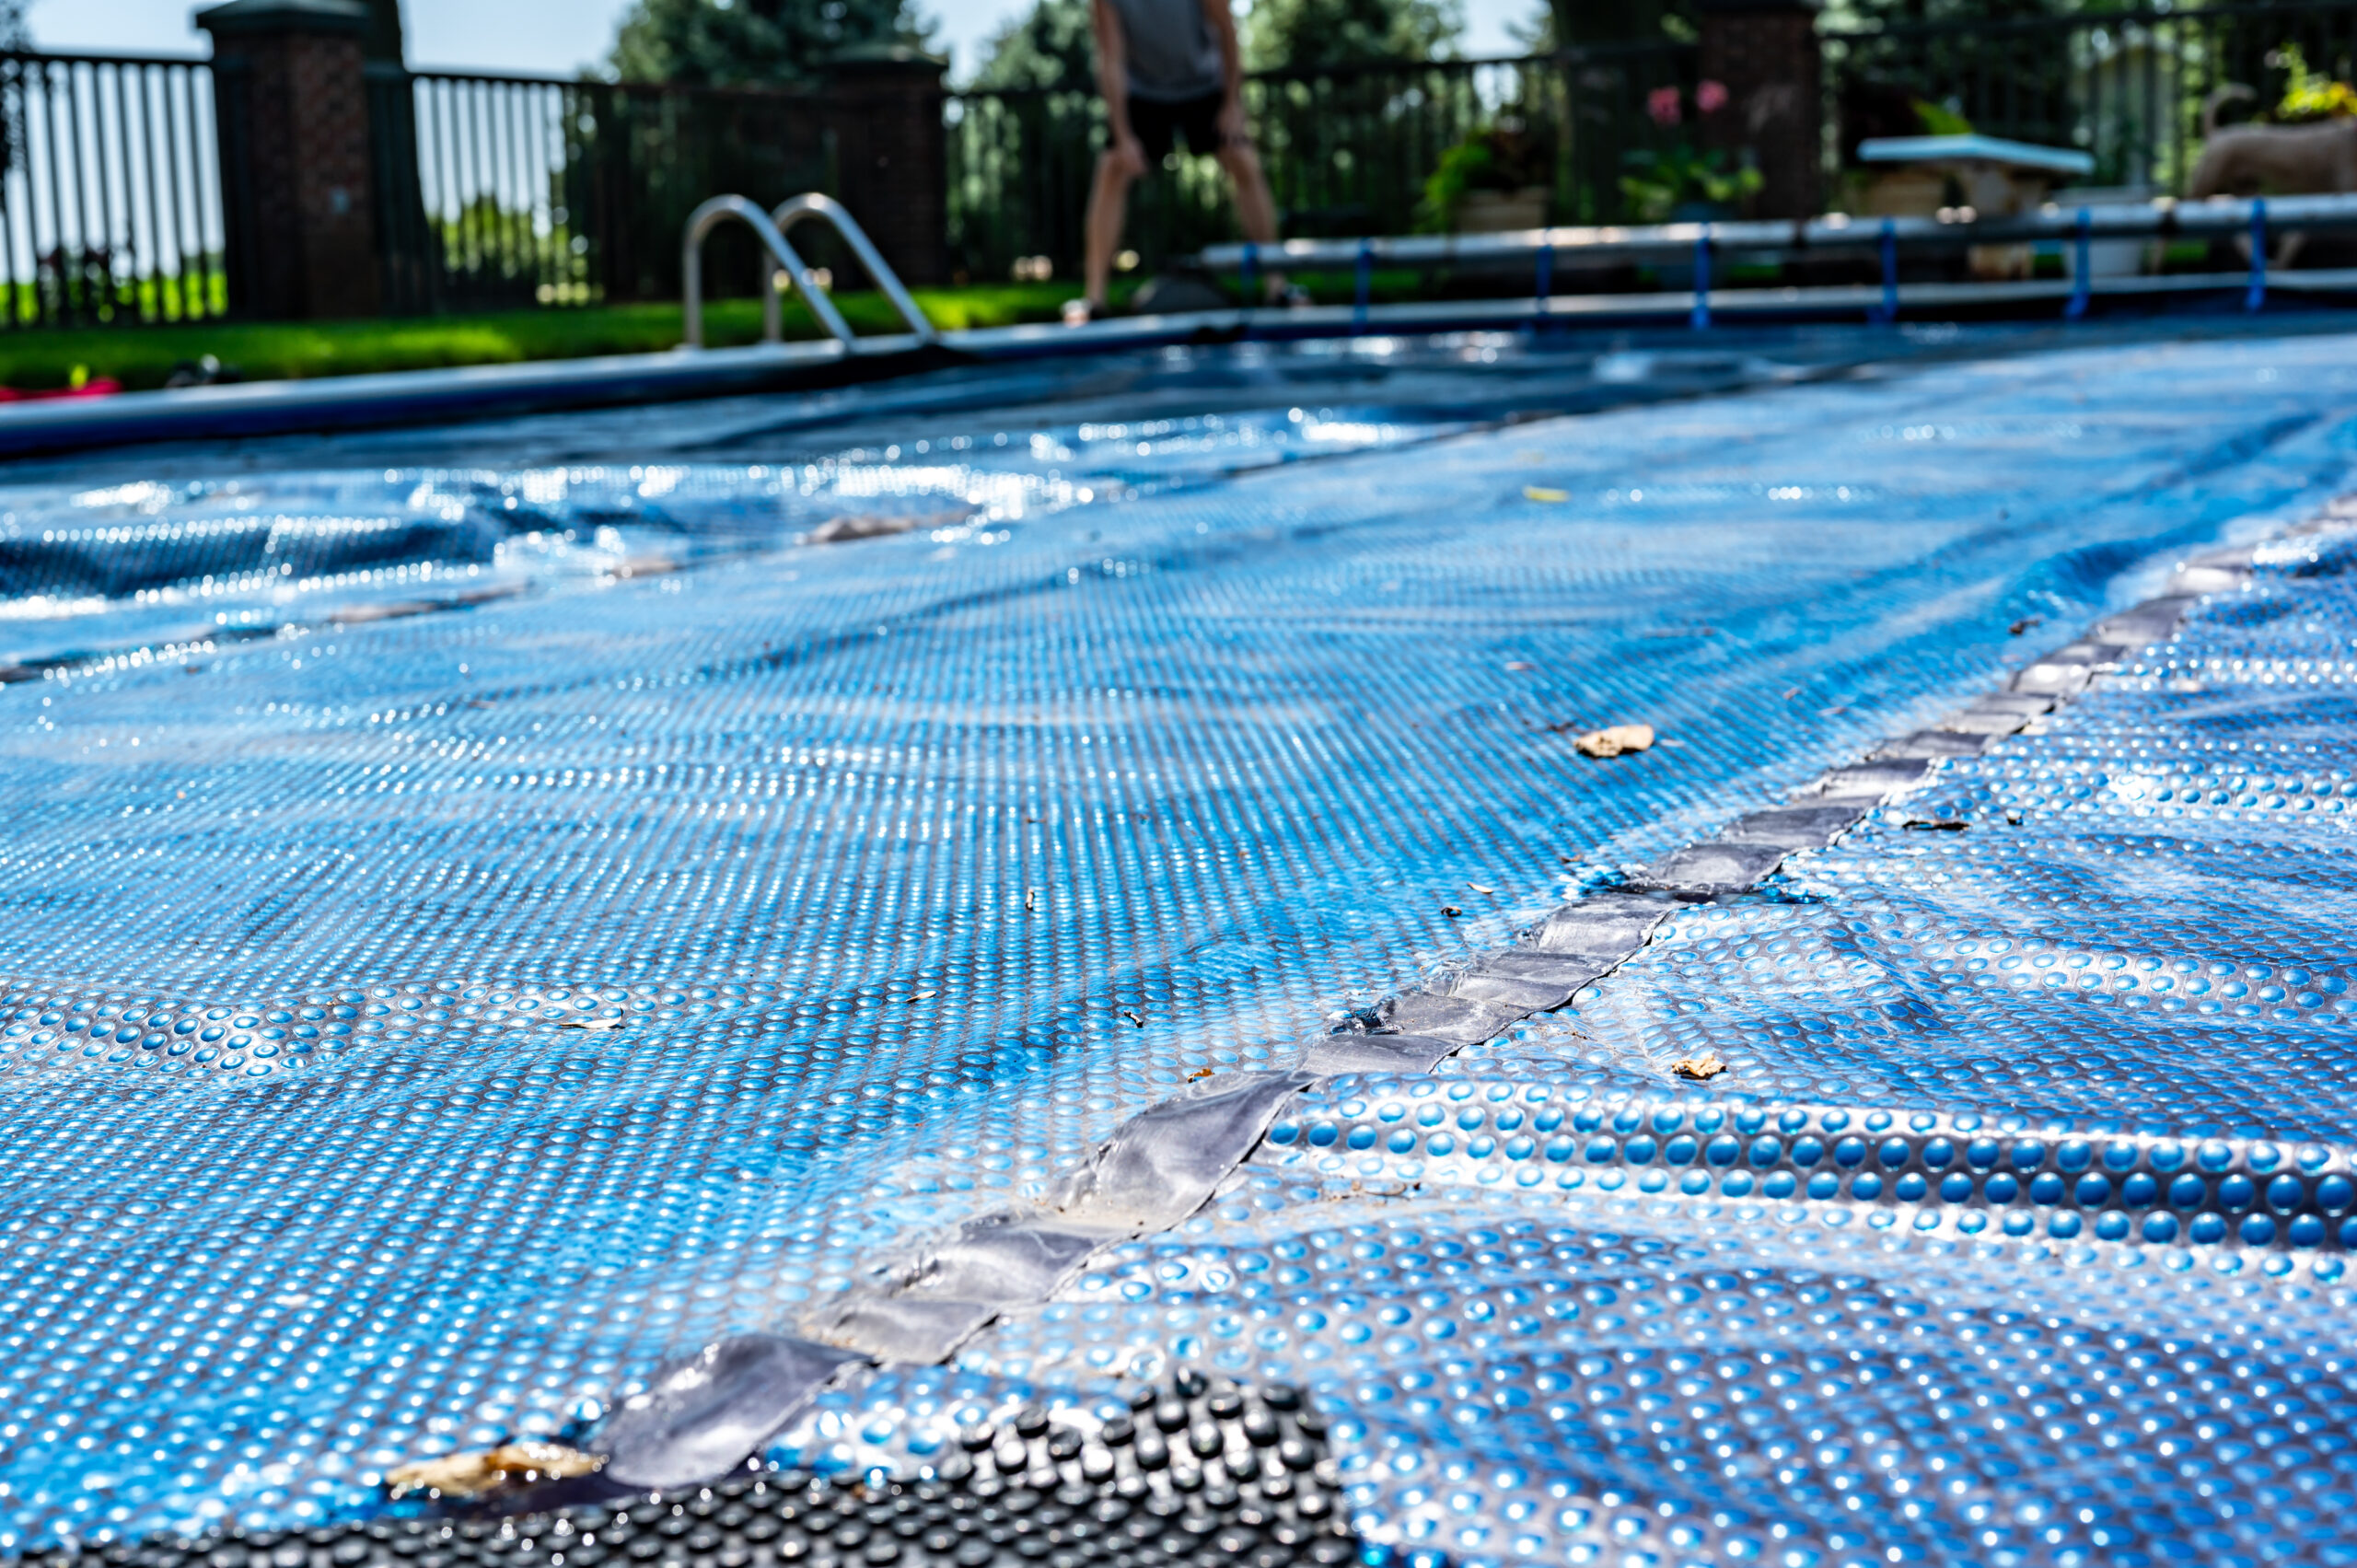 A pool cover securely placed over a swimming pool